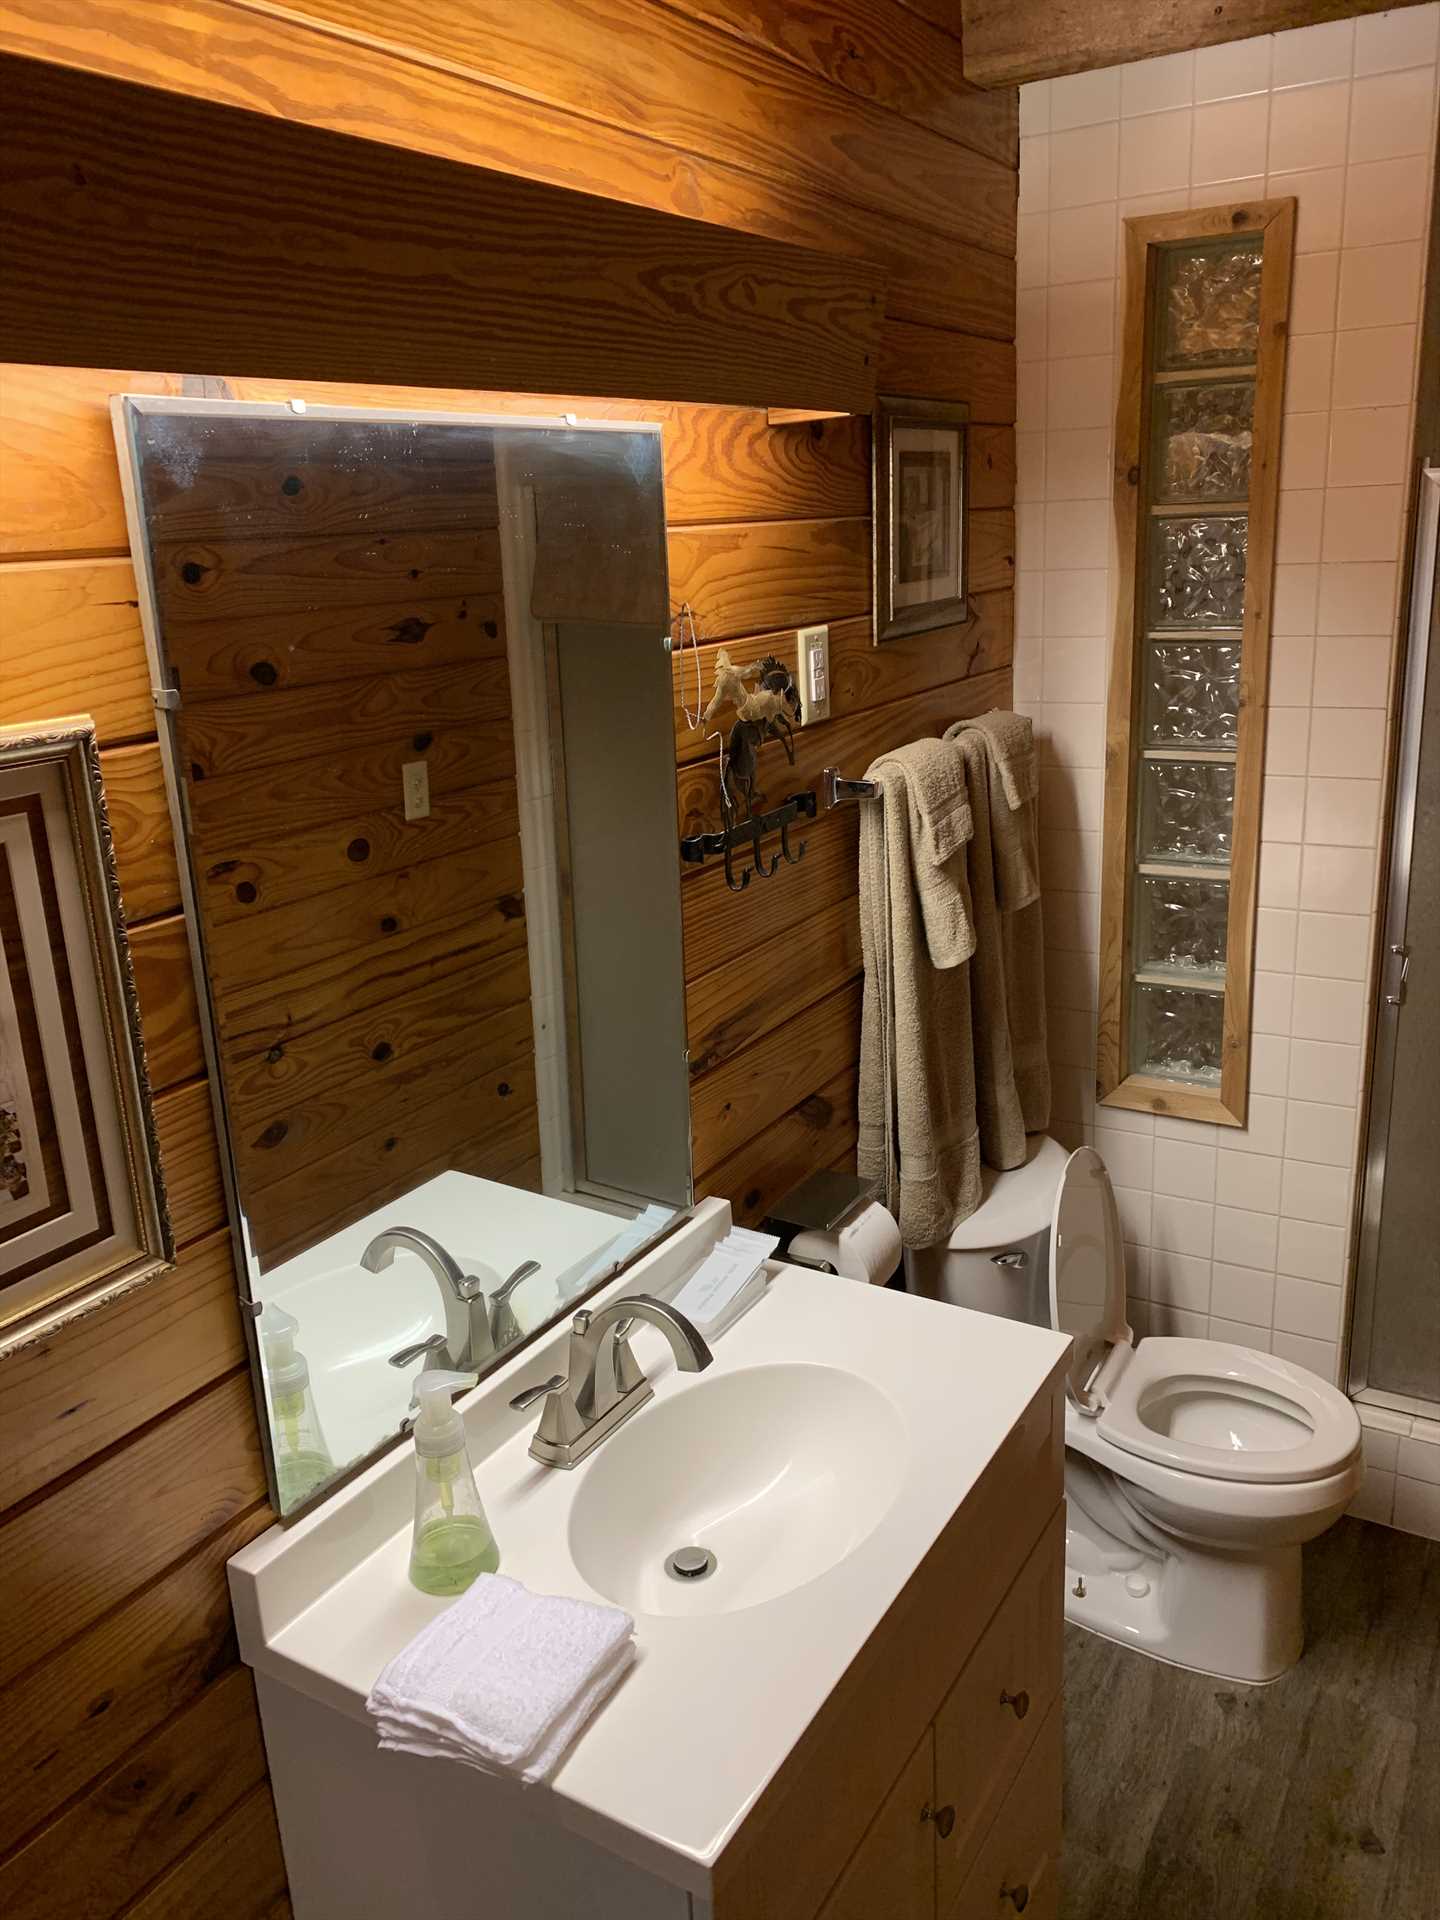                                                 Rustic woodwork and clean and modern amenities make even the bathroom a memorable space! All bath linens are included with your rental, too.